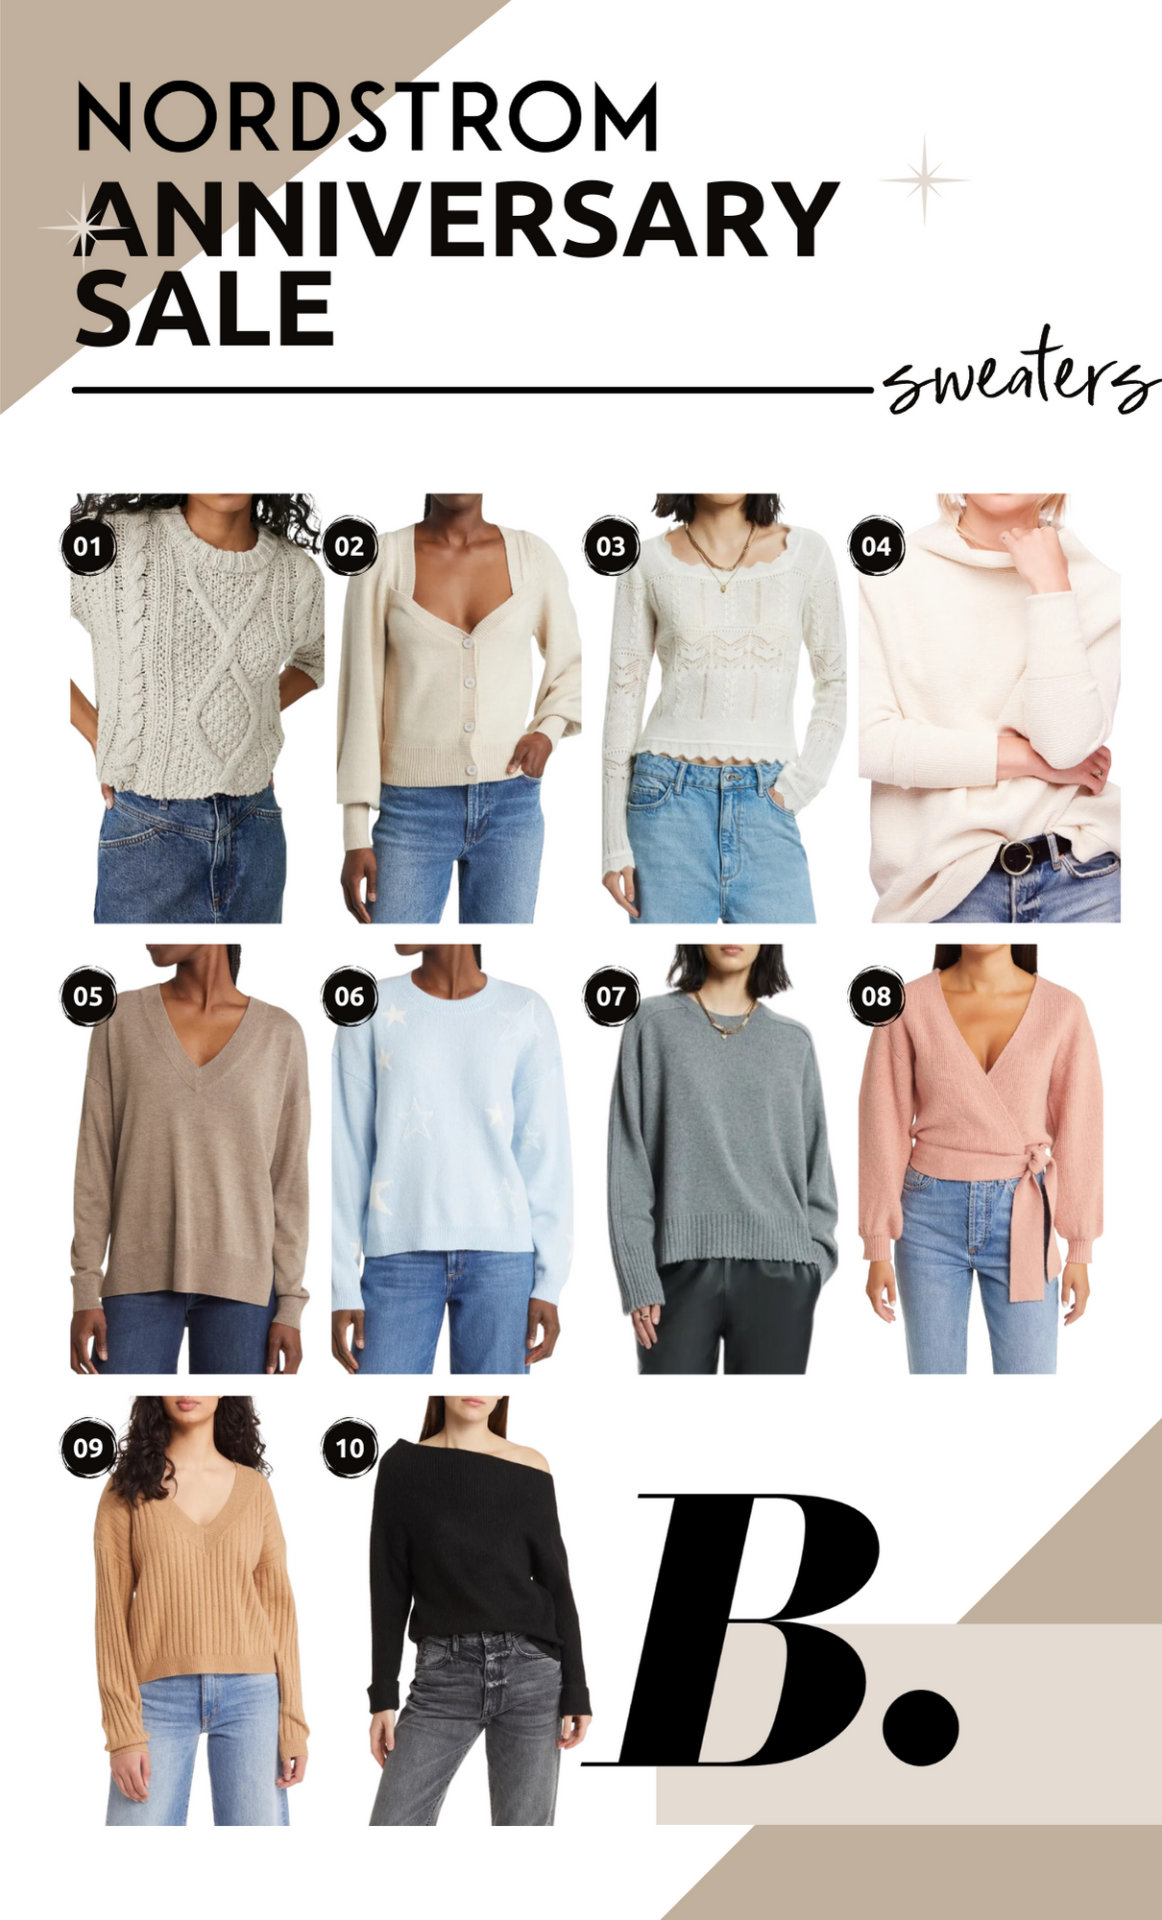 My Top 10 Sweaters From The Nordstrom Anniversary Sale